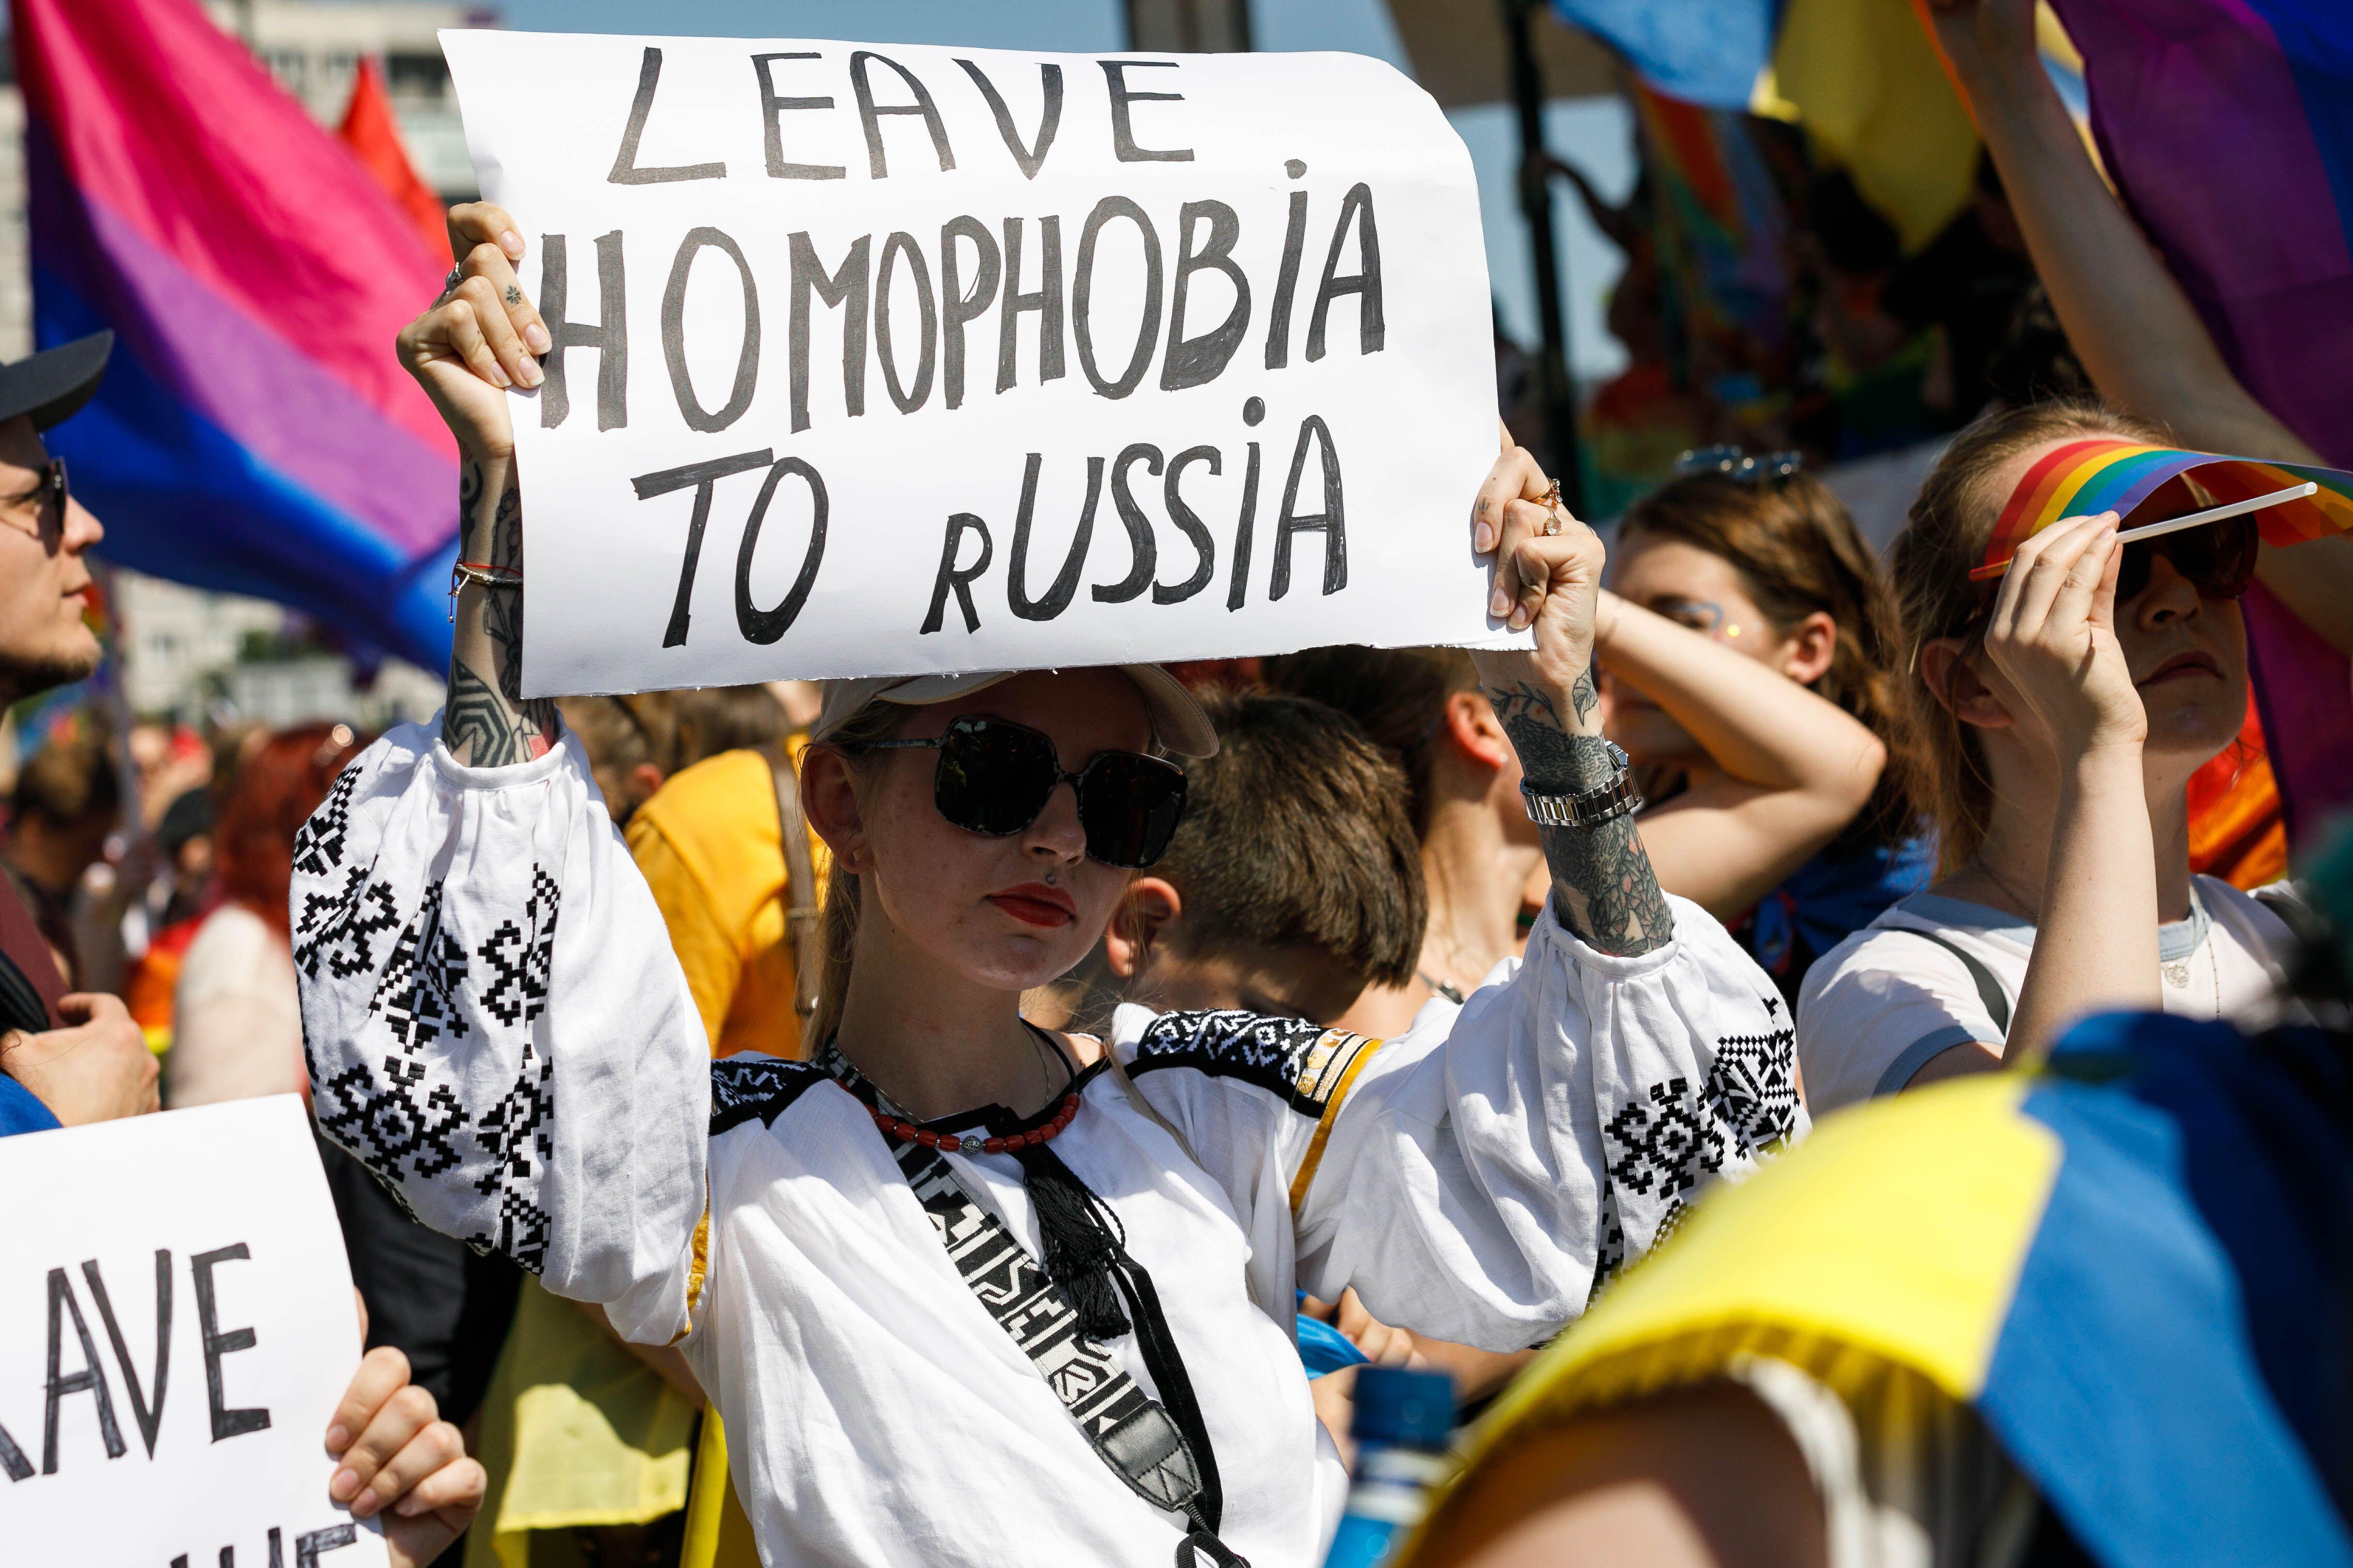 Russian Forced Rough Group Porn - Ukraine war: Russian soldiers accused of anti-gay attacks | openDemocracy